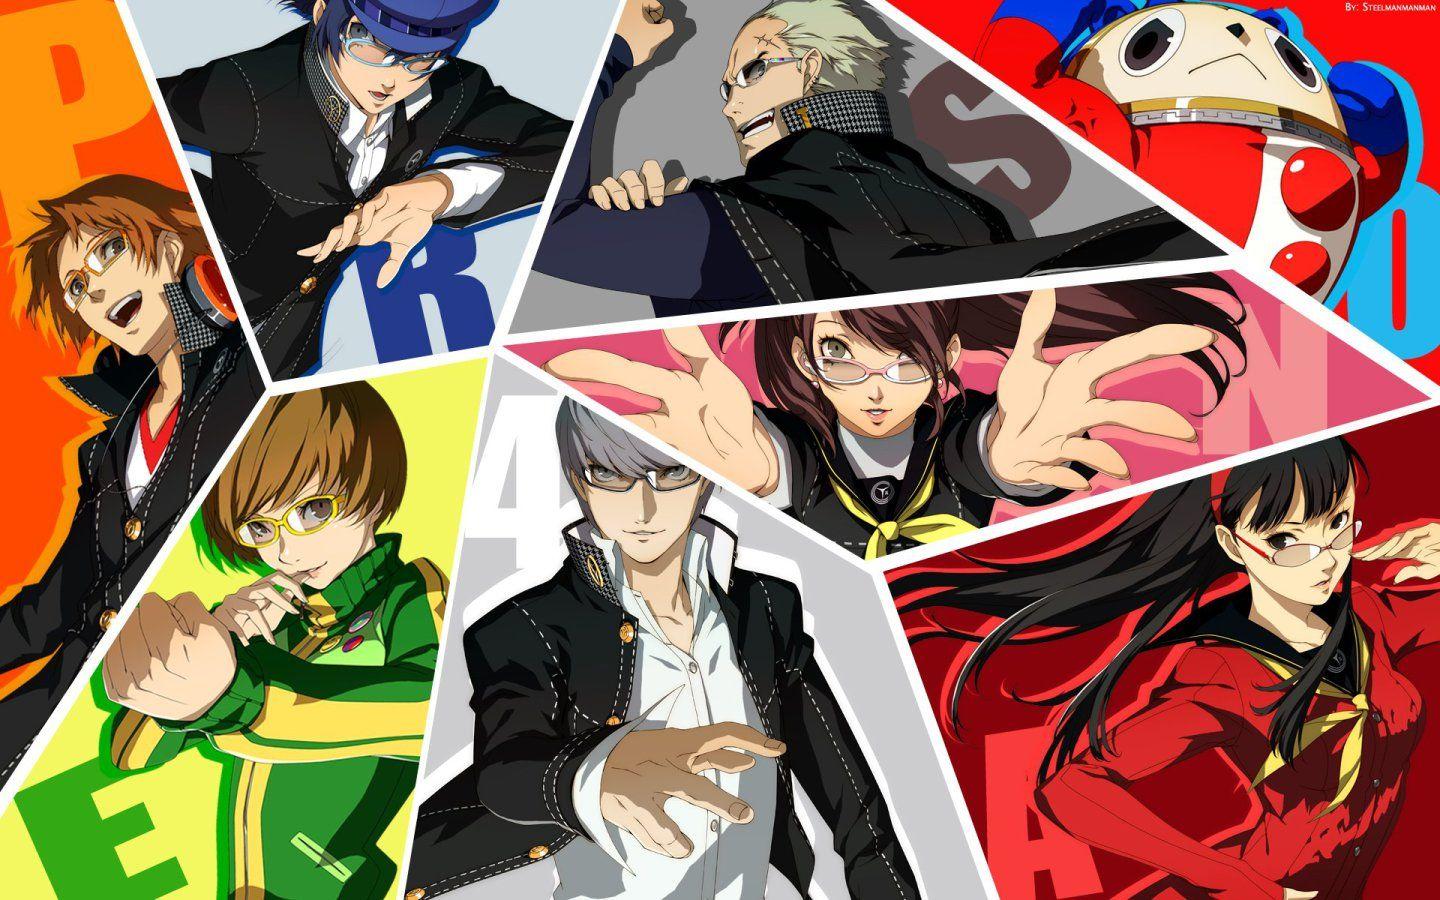 Persona 4 Golden: what F. Scott Fitzgerald can teach us about games